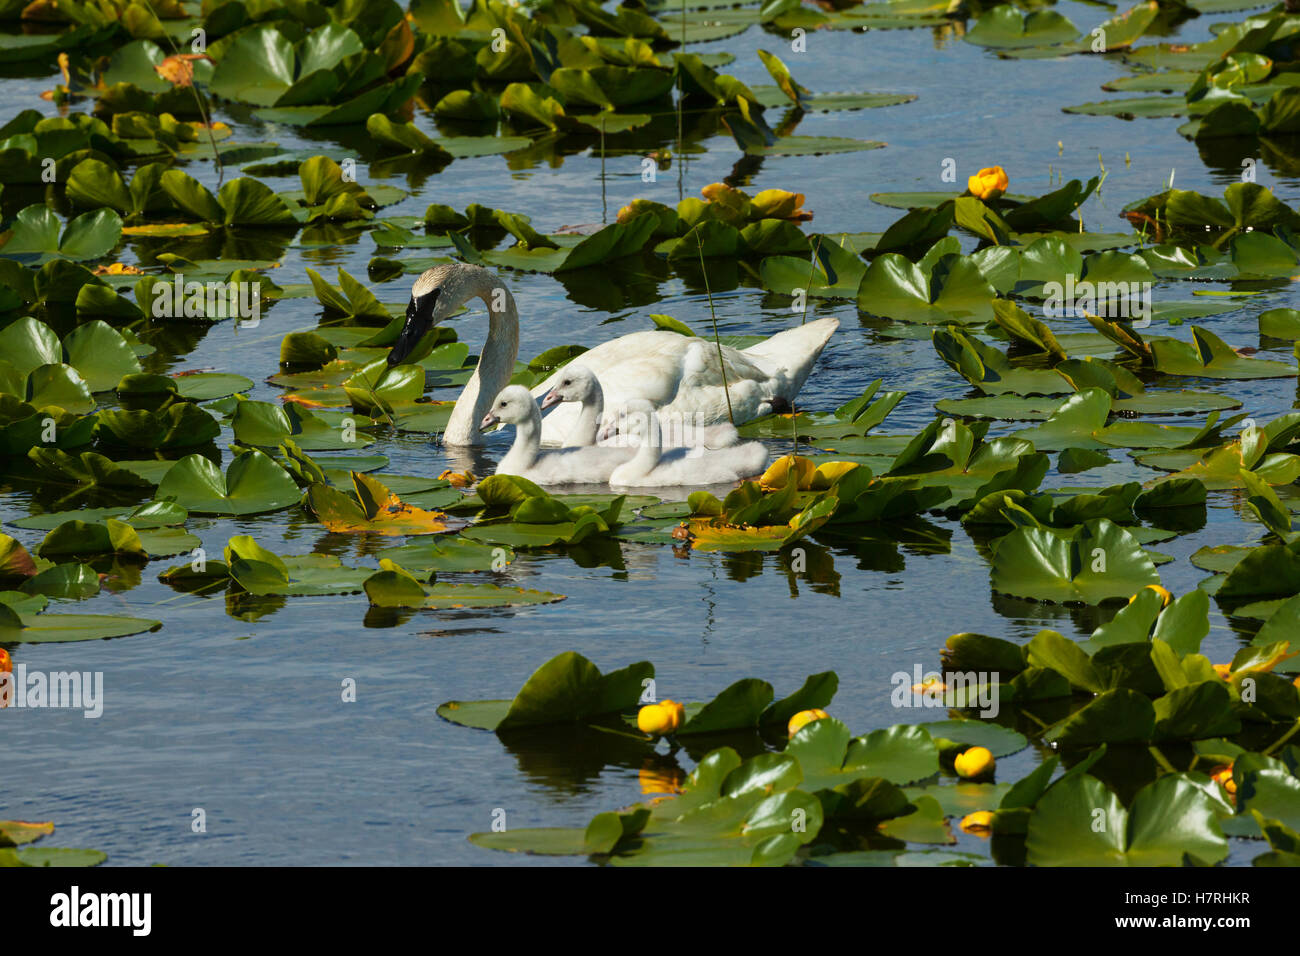 An Adult Trumpeter Swan (Cygnus Buccinator) Swims With Three Cygnets In A Lily Pad Covered Lake On The Kenai Peninsula In Summertime, South-Central... Stock Photo